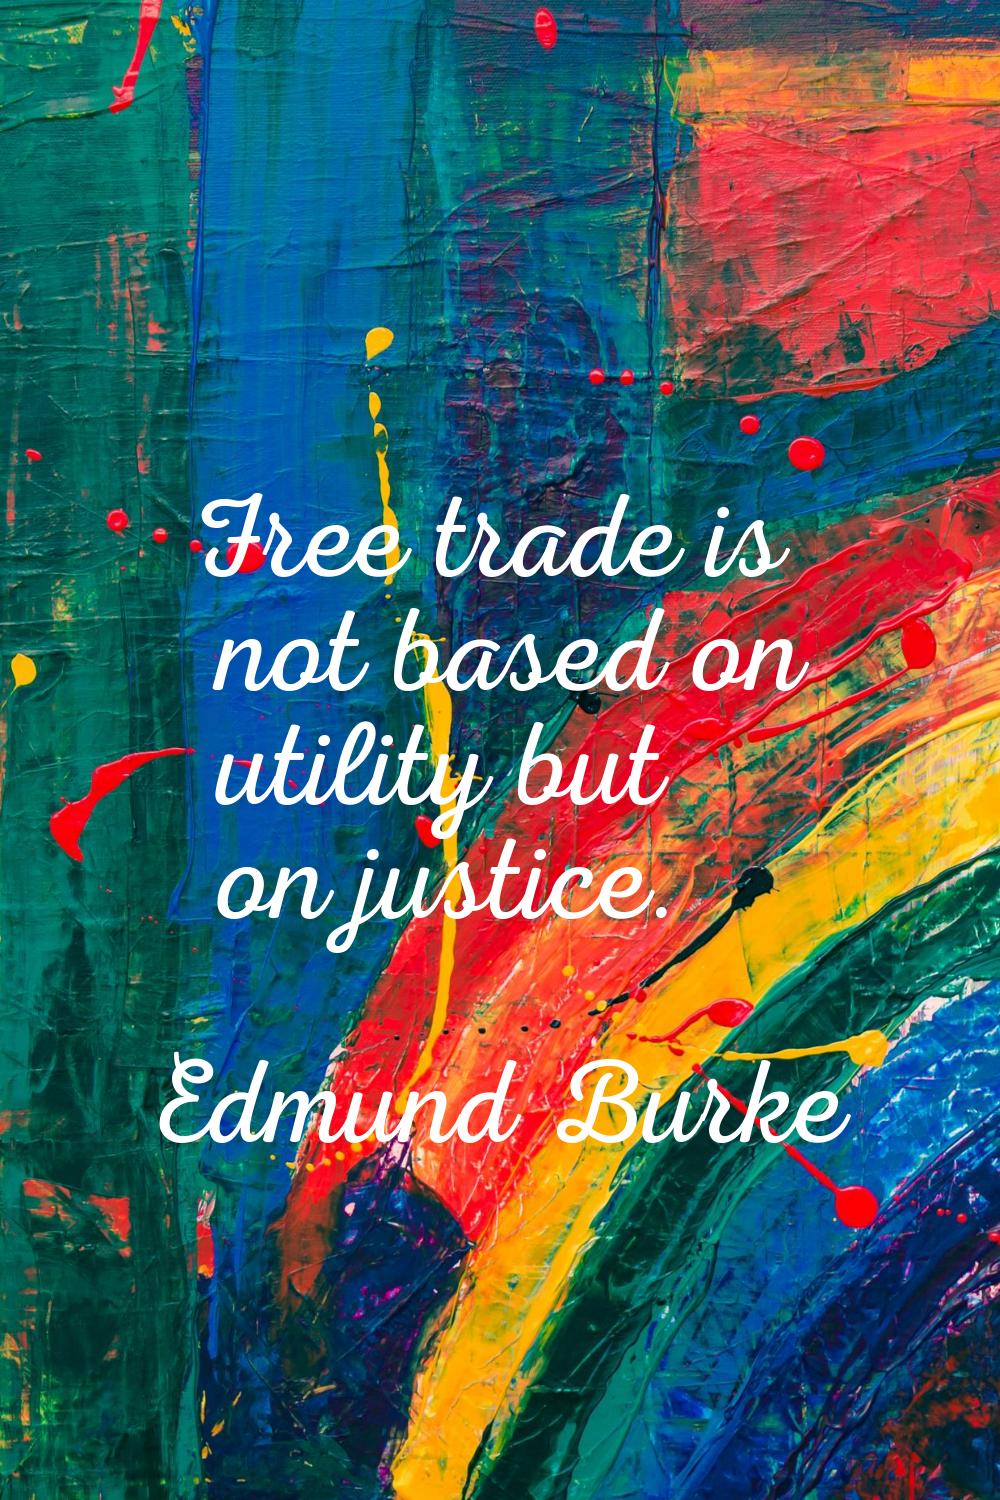 Free trade is not based on utility but on justice.